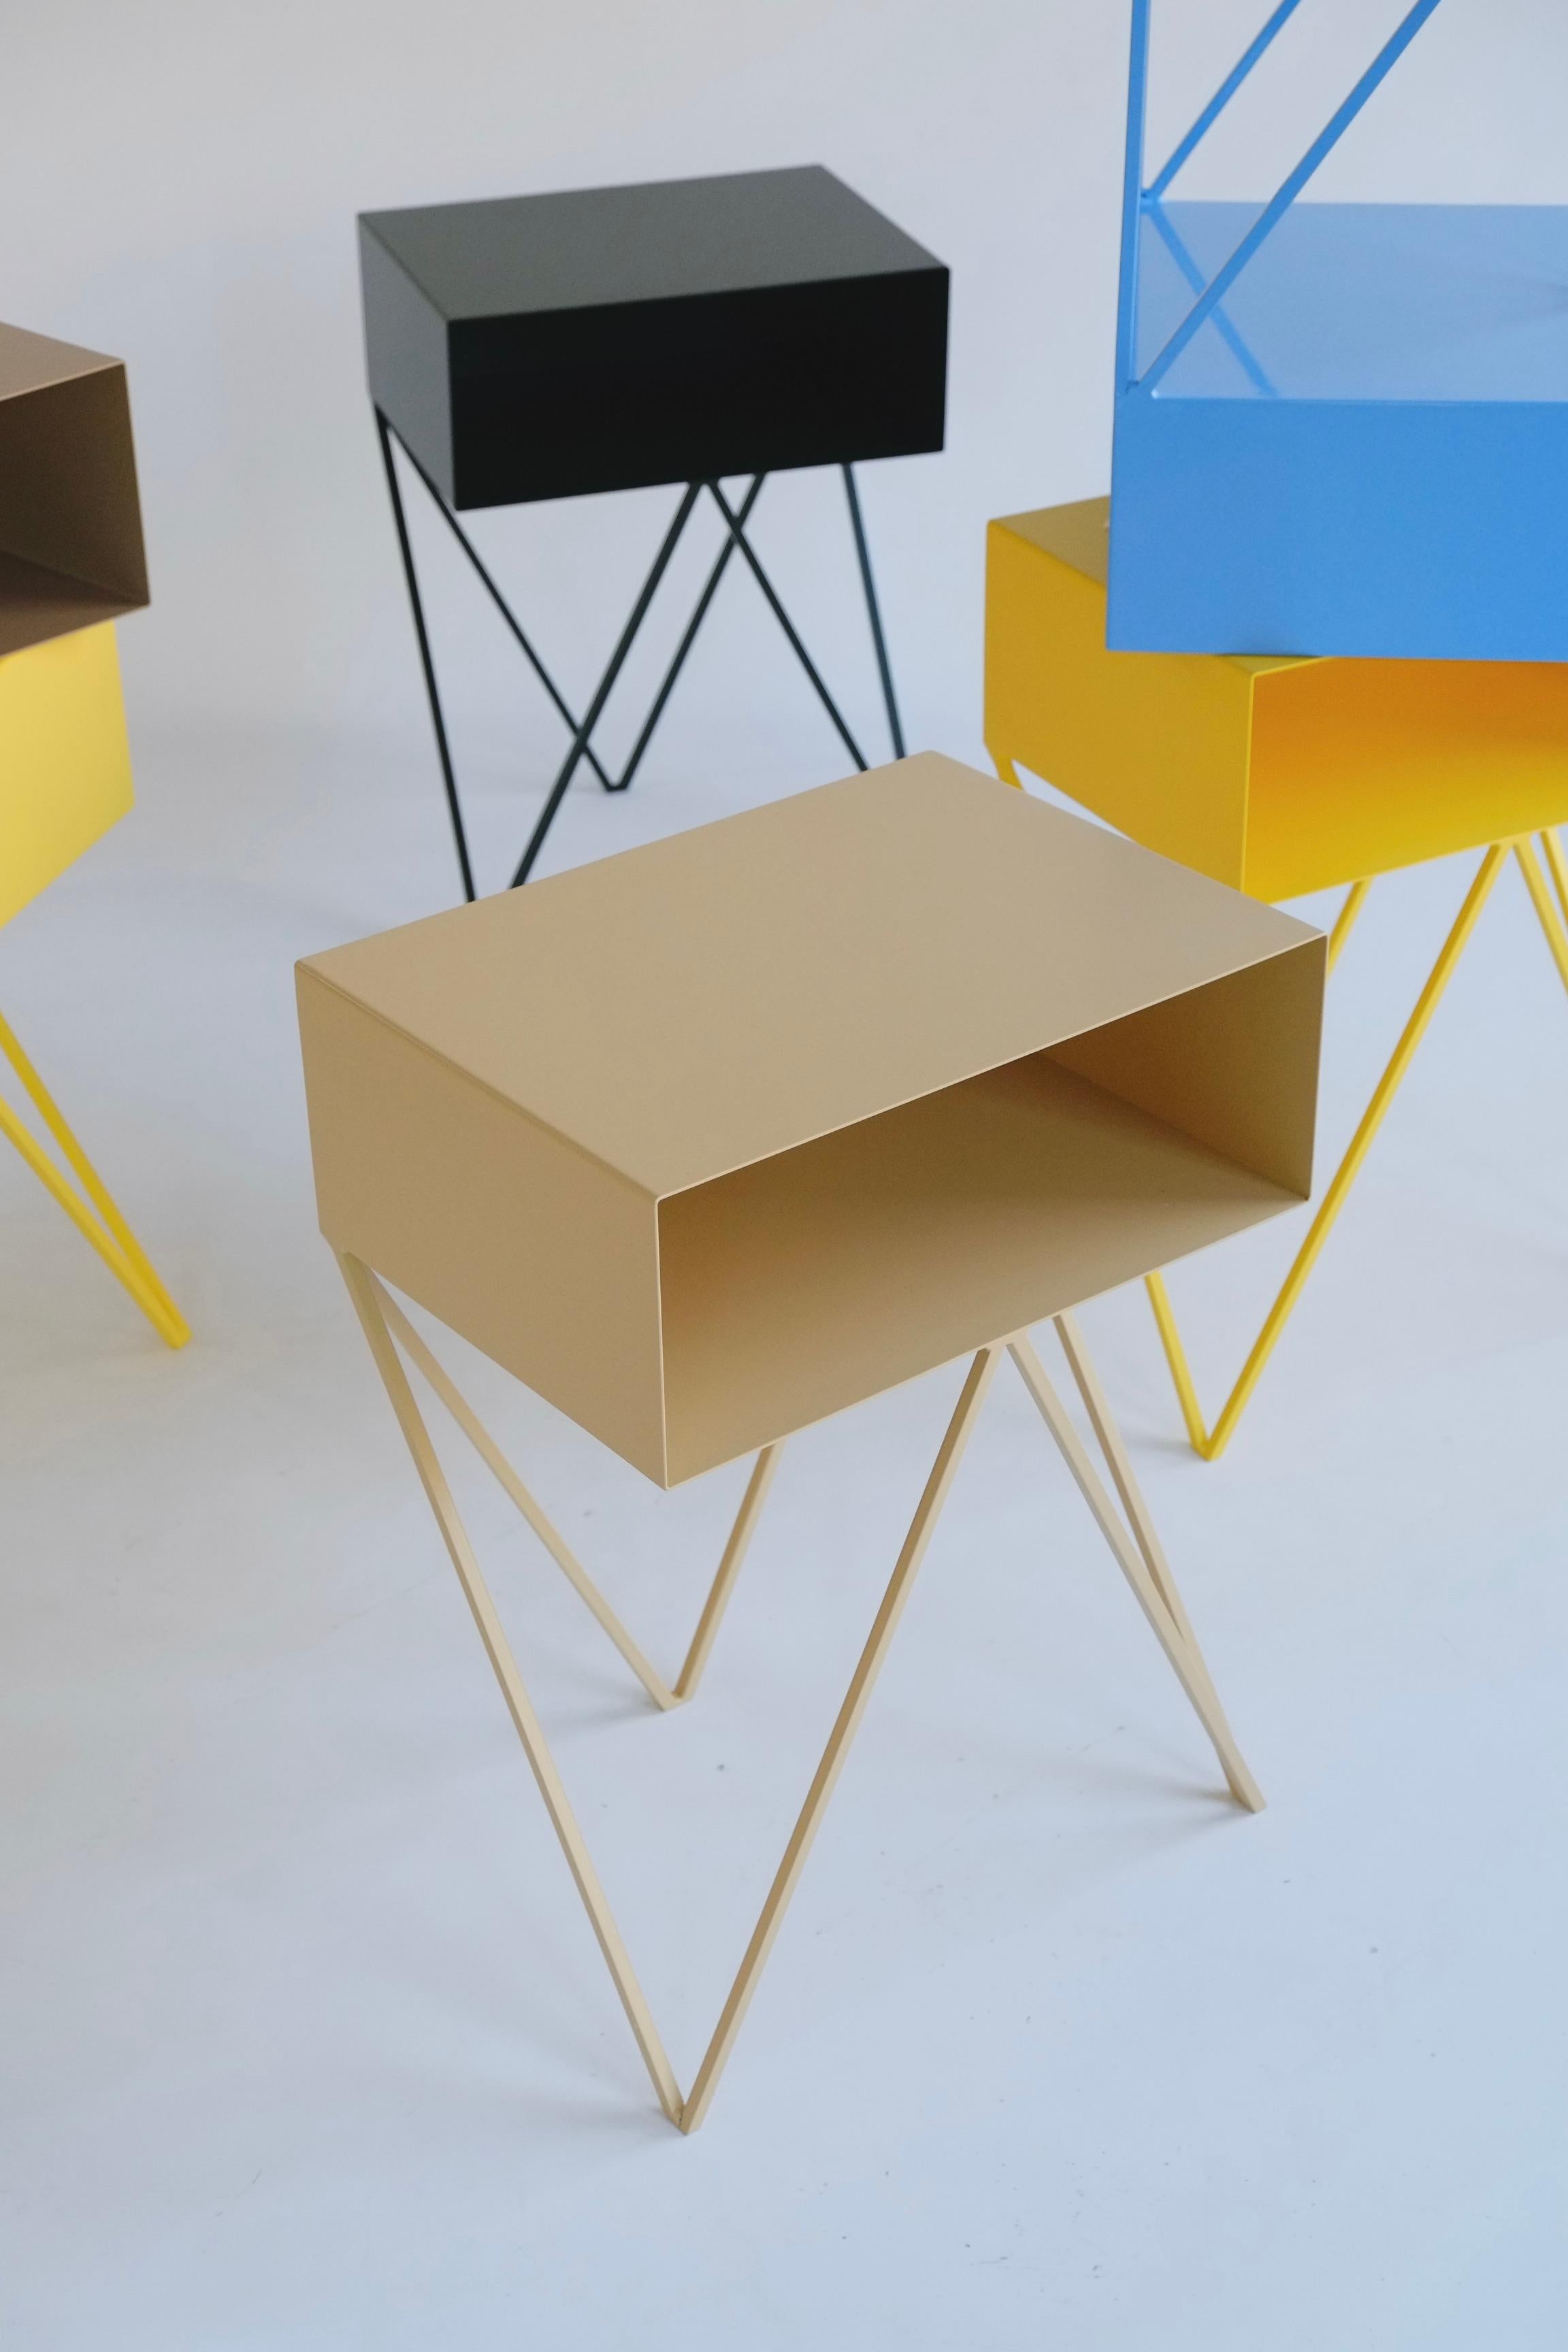 A beautiful pair of butternut beige Robot bedside tables. The Robot side table features an open shelf on zig zag legs. A fun and functional design made of solid steel, powder-coated in yellow. The clean lines look great against period details as